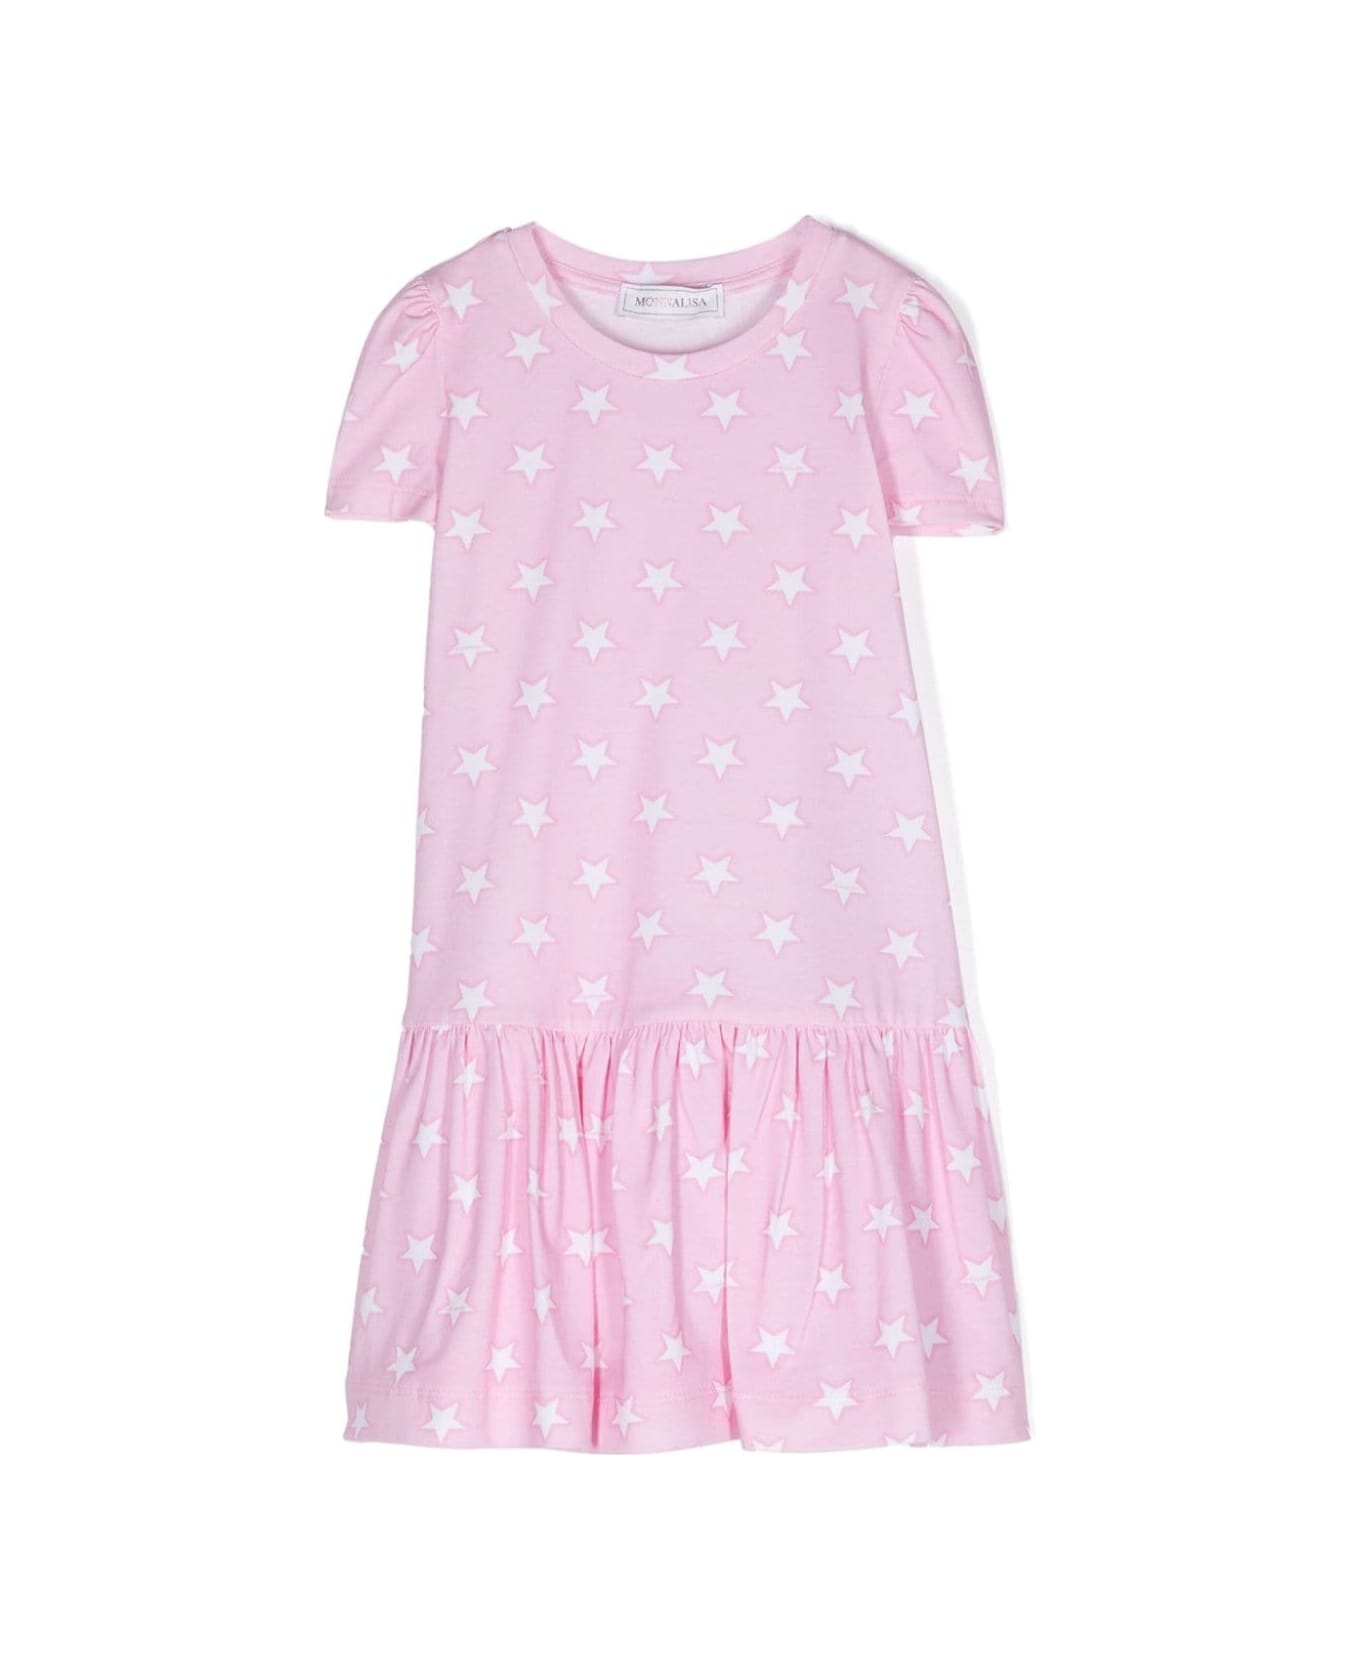 Monnalisa Pink Dress With All-over Star Print In Stretch Cotton Girl - Pink ワンピース＆ドレス